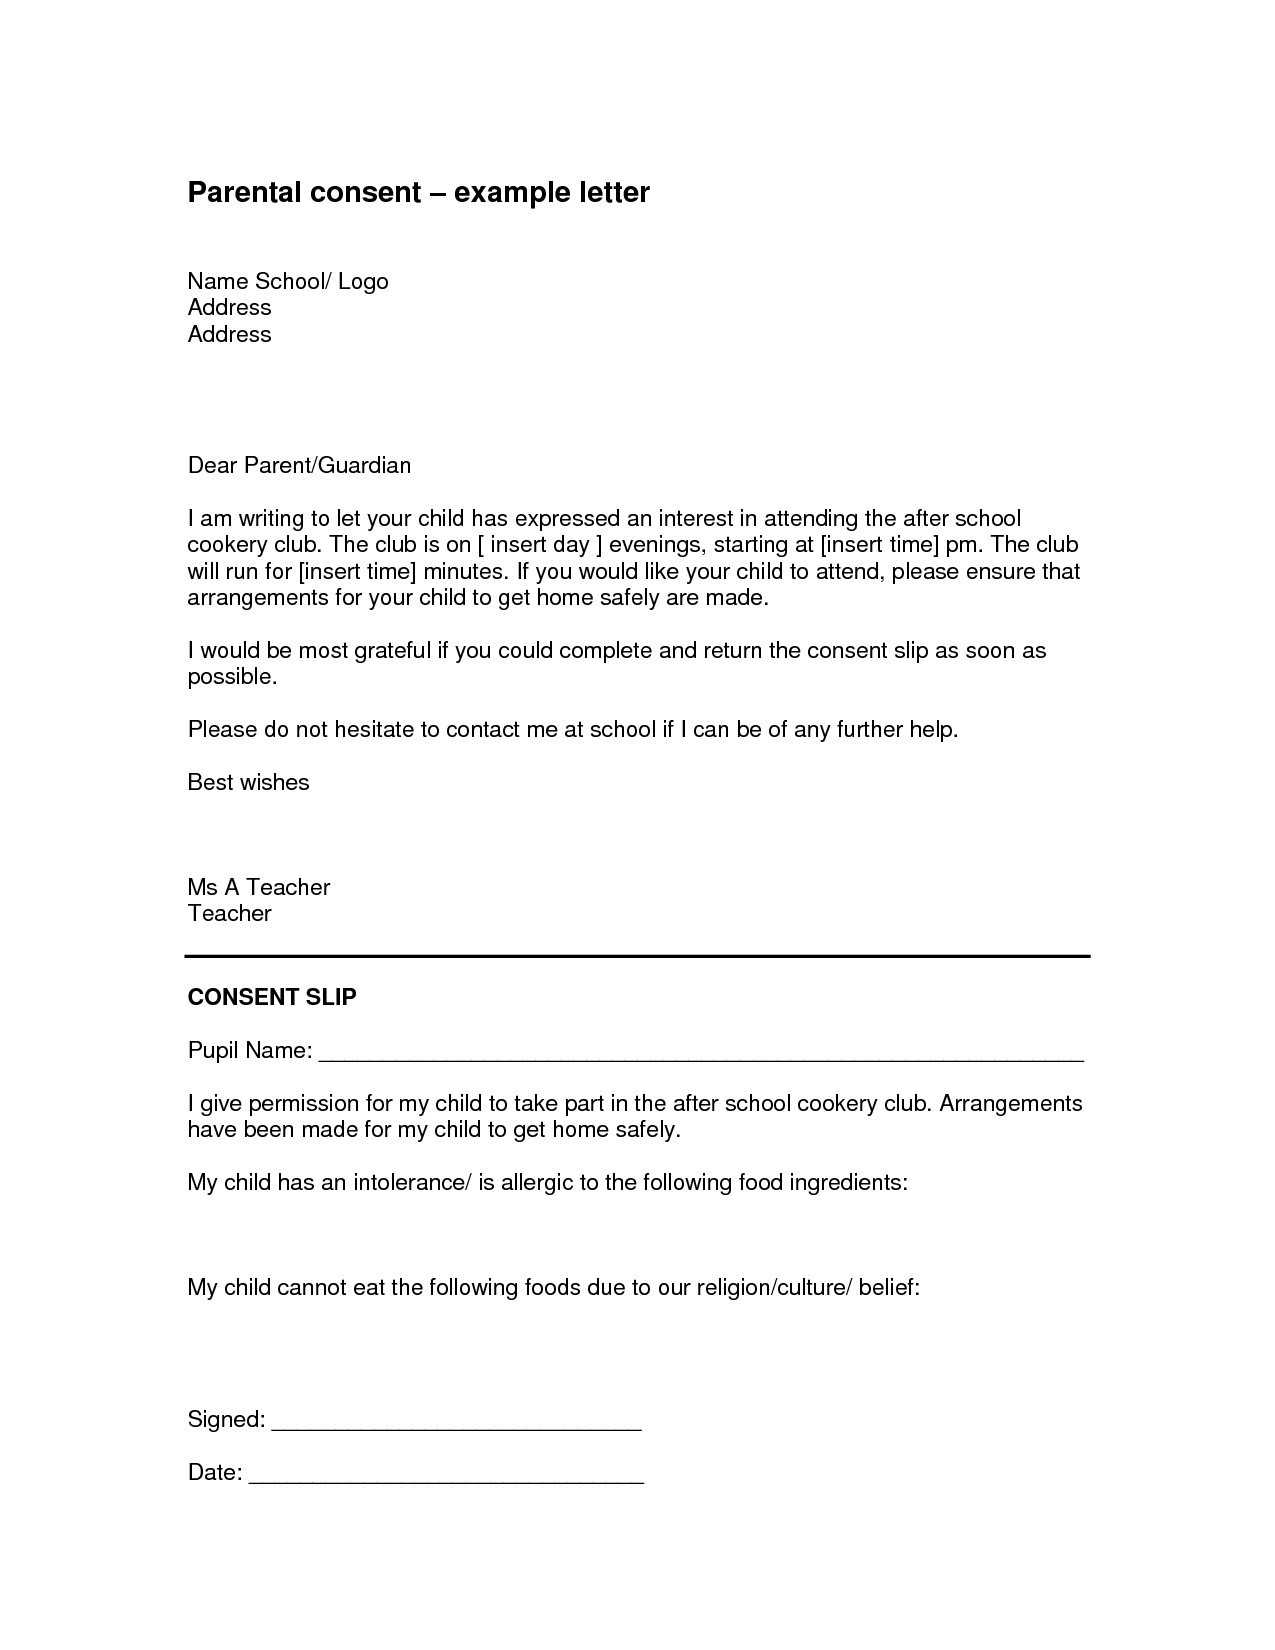 notarized-travel-consent-letter-template-samples-letter-template